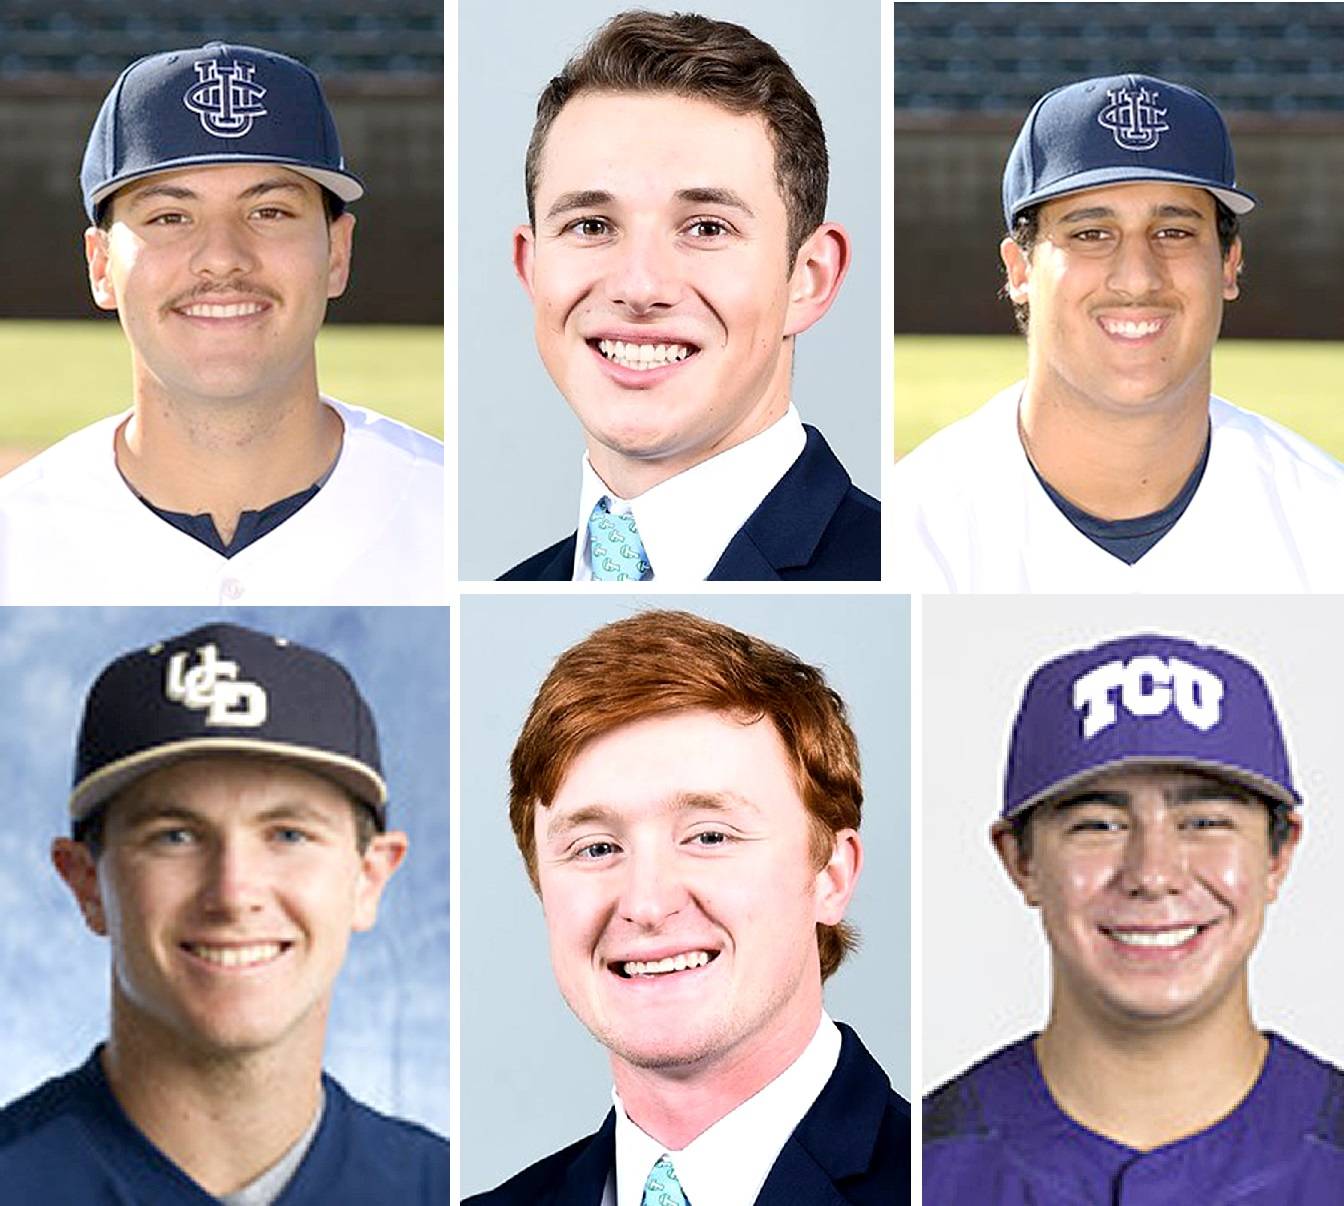 Meet the newest Lefties signees. Clockwise, from top right, are Jacob Castro, Michael Specich Jr., Andre Antone, David Langer, David Bedgood, Tristan Hanoian.